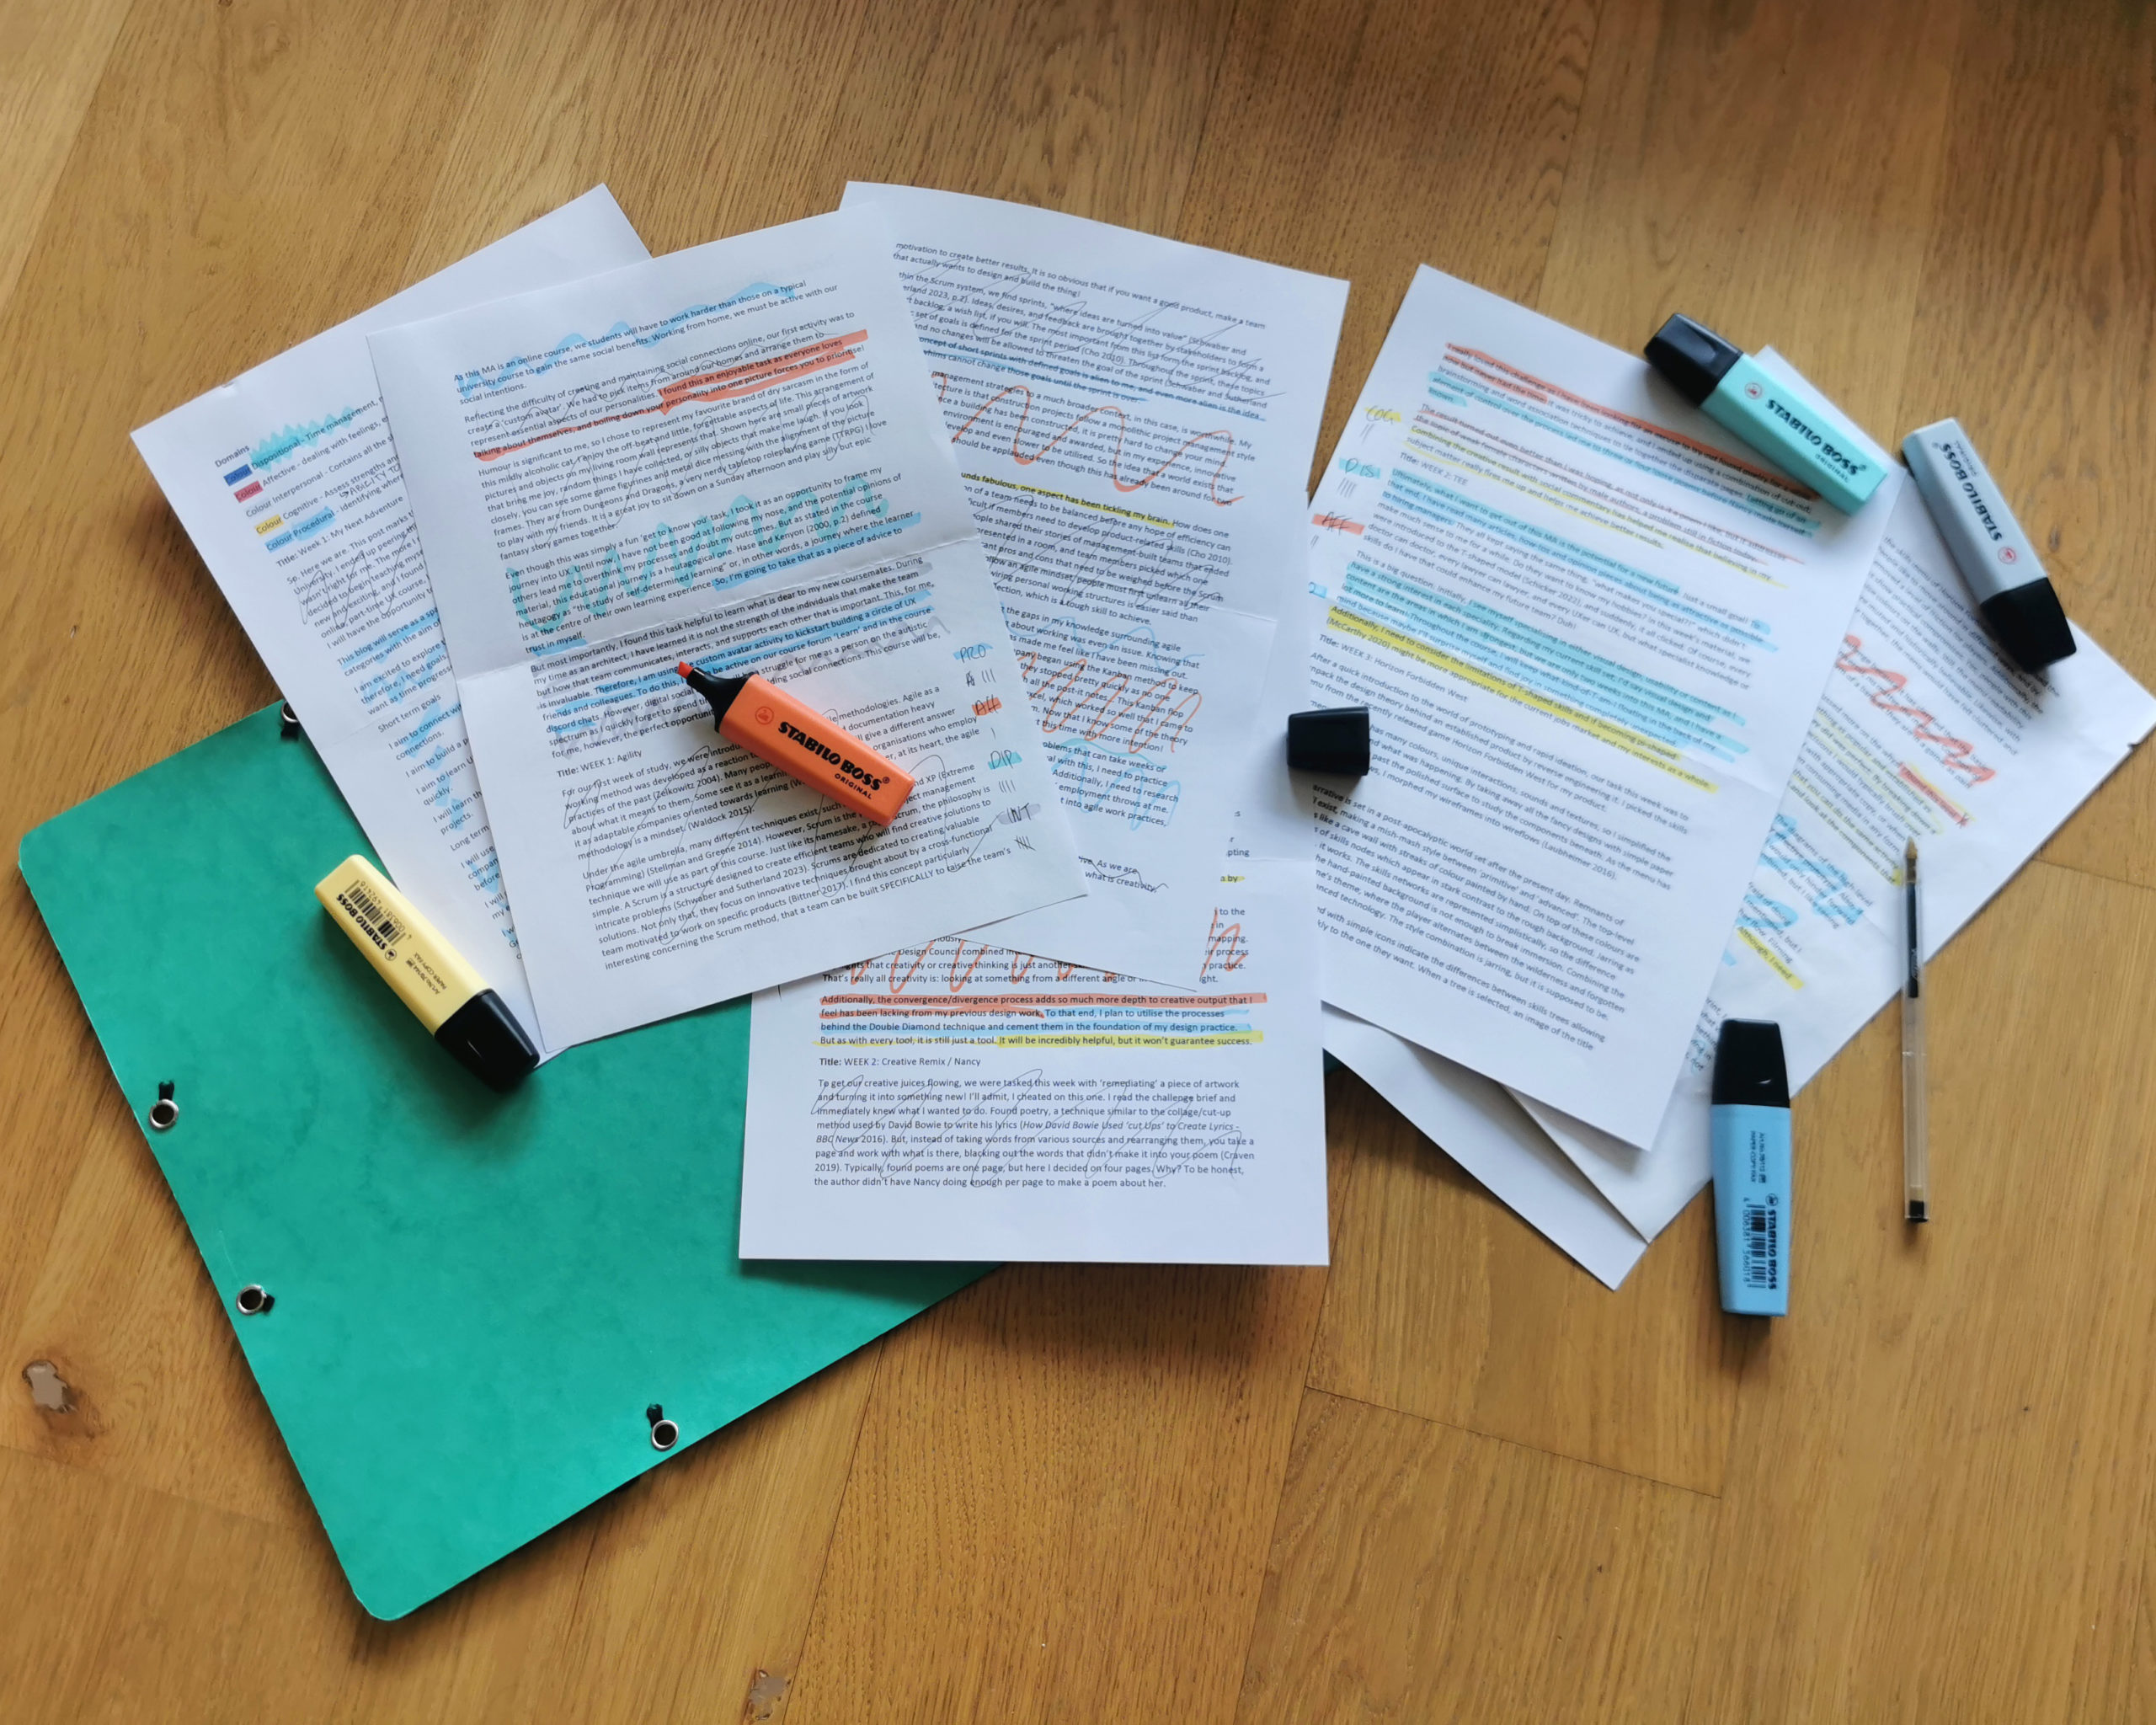 A pile of paper is shown scattered over a surface. The paper is filled top to bottom with writing from the author. Highlighters are arranged artfully over the paper and correspond to sections of highlighted text.